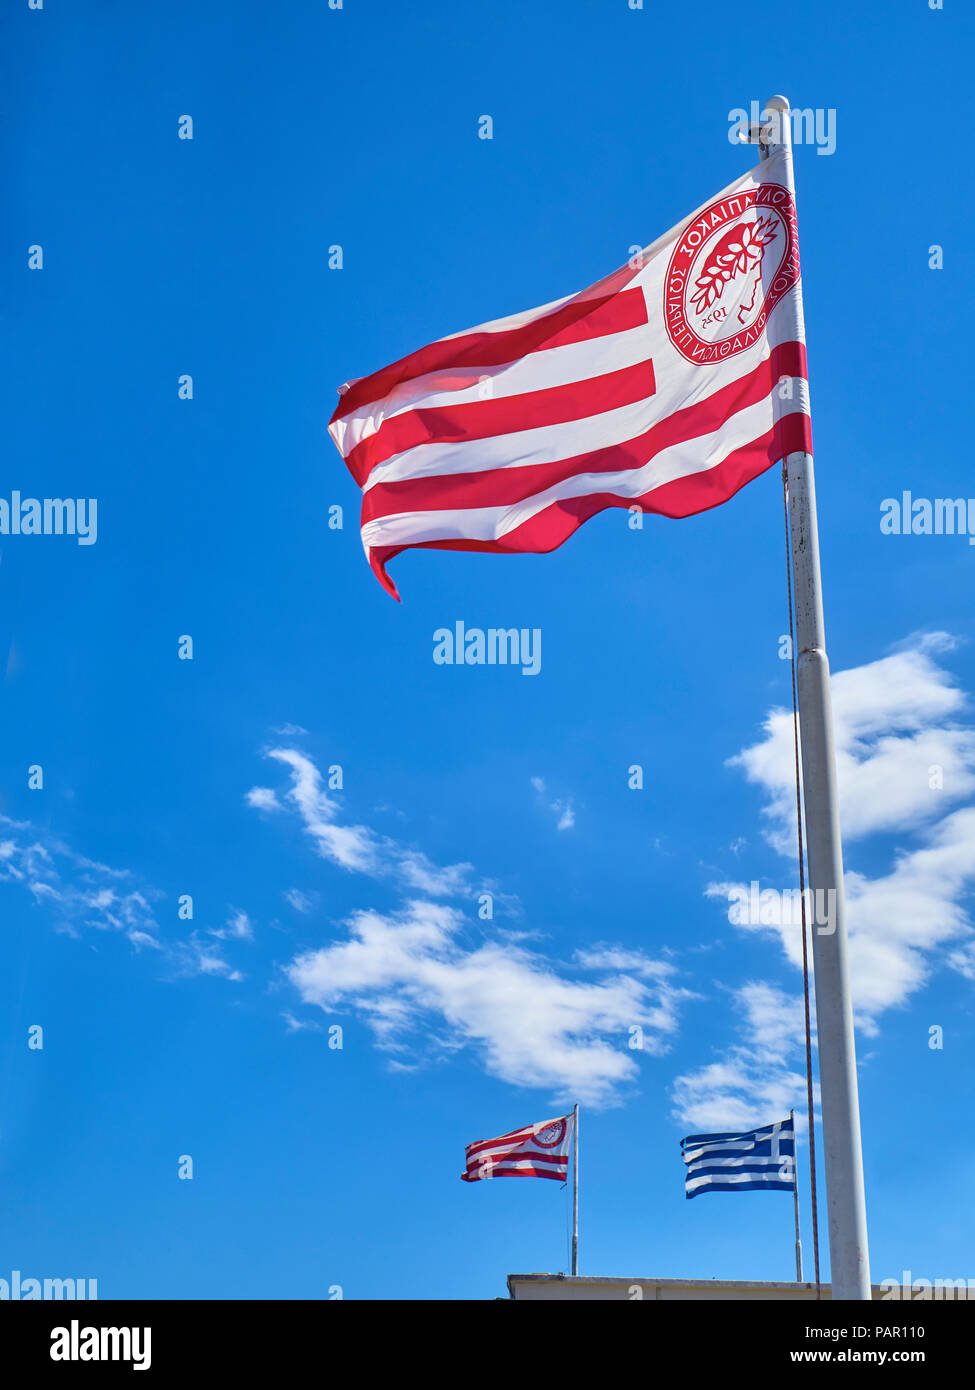 Flags of Olympiacos Football Club team and Greece waving on a blue sky. Stock Photo